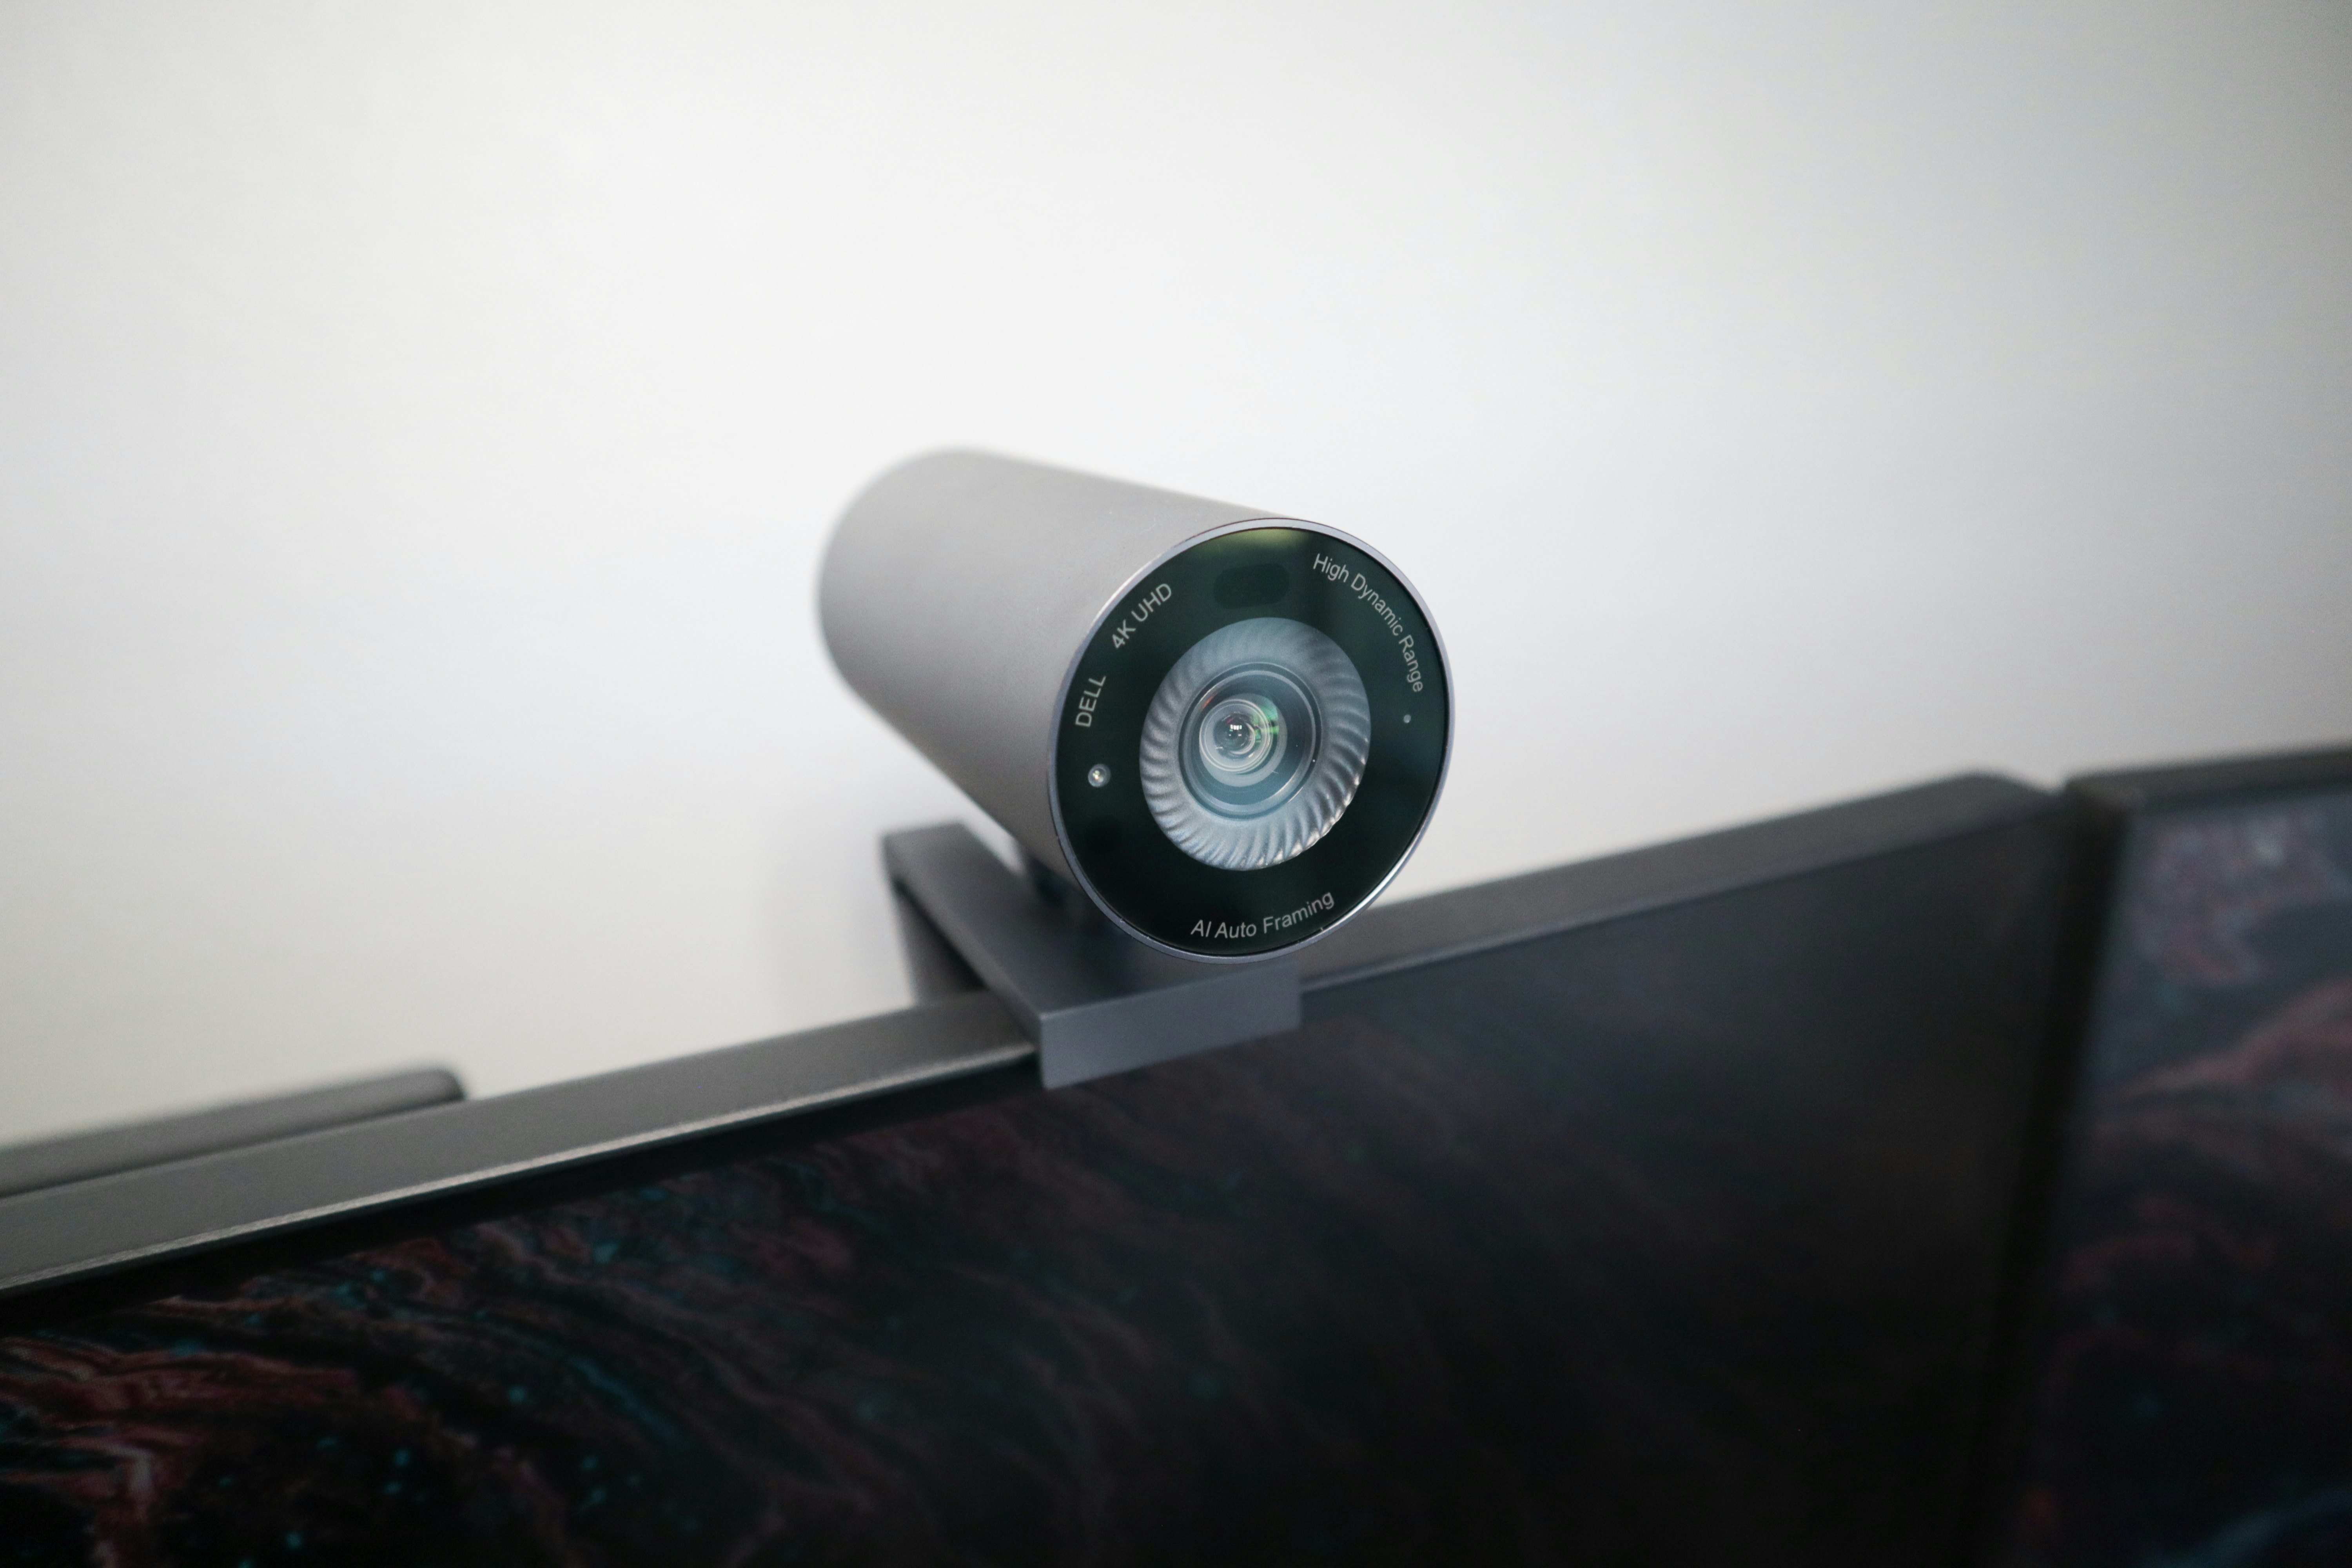 Dell UltraSharp review: This 4K webcam is fantastic for streamers